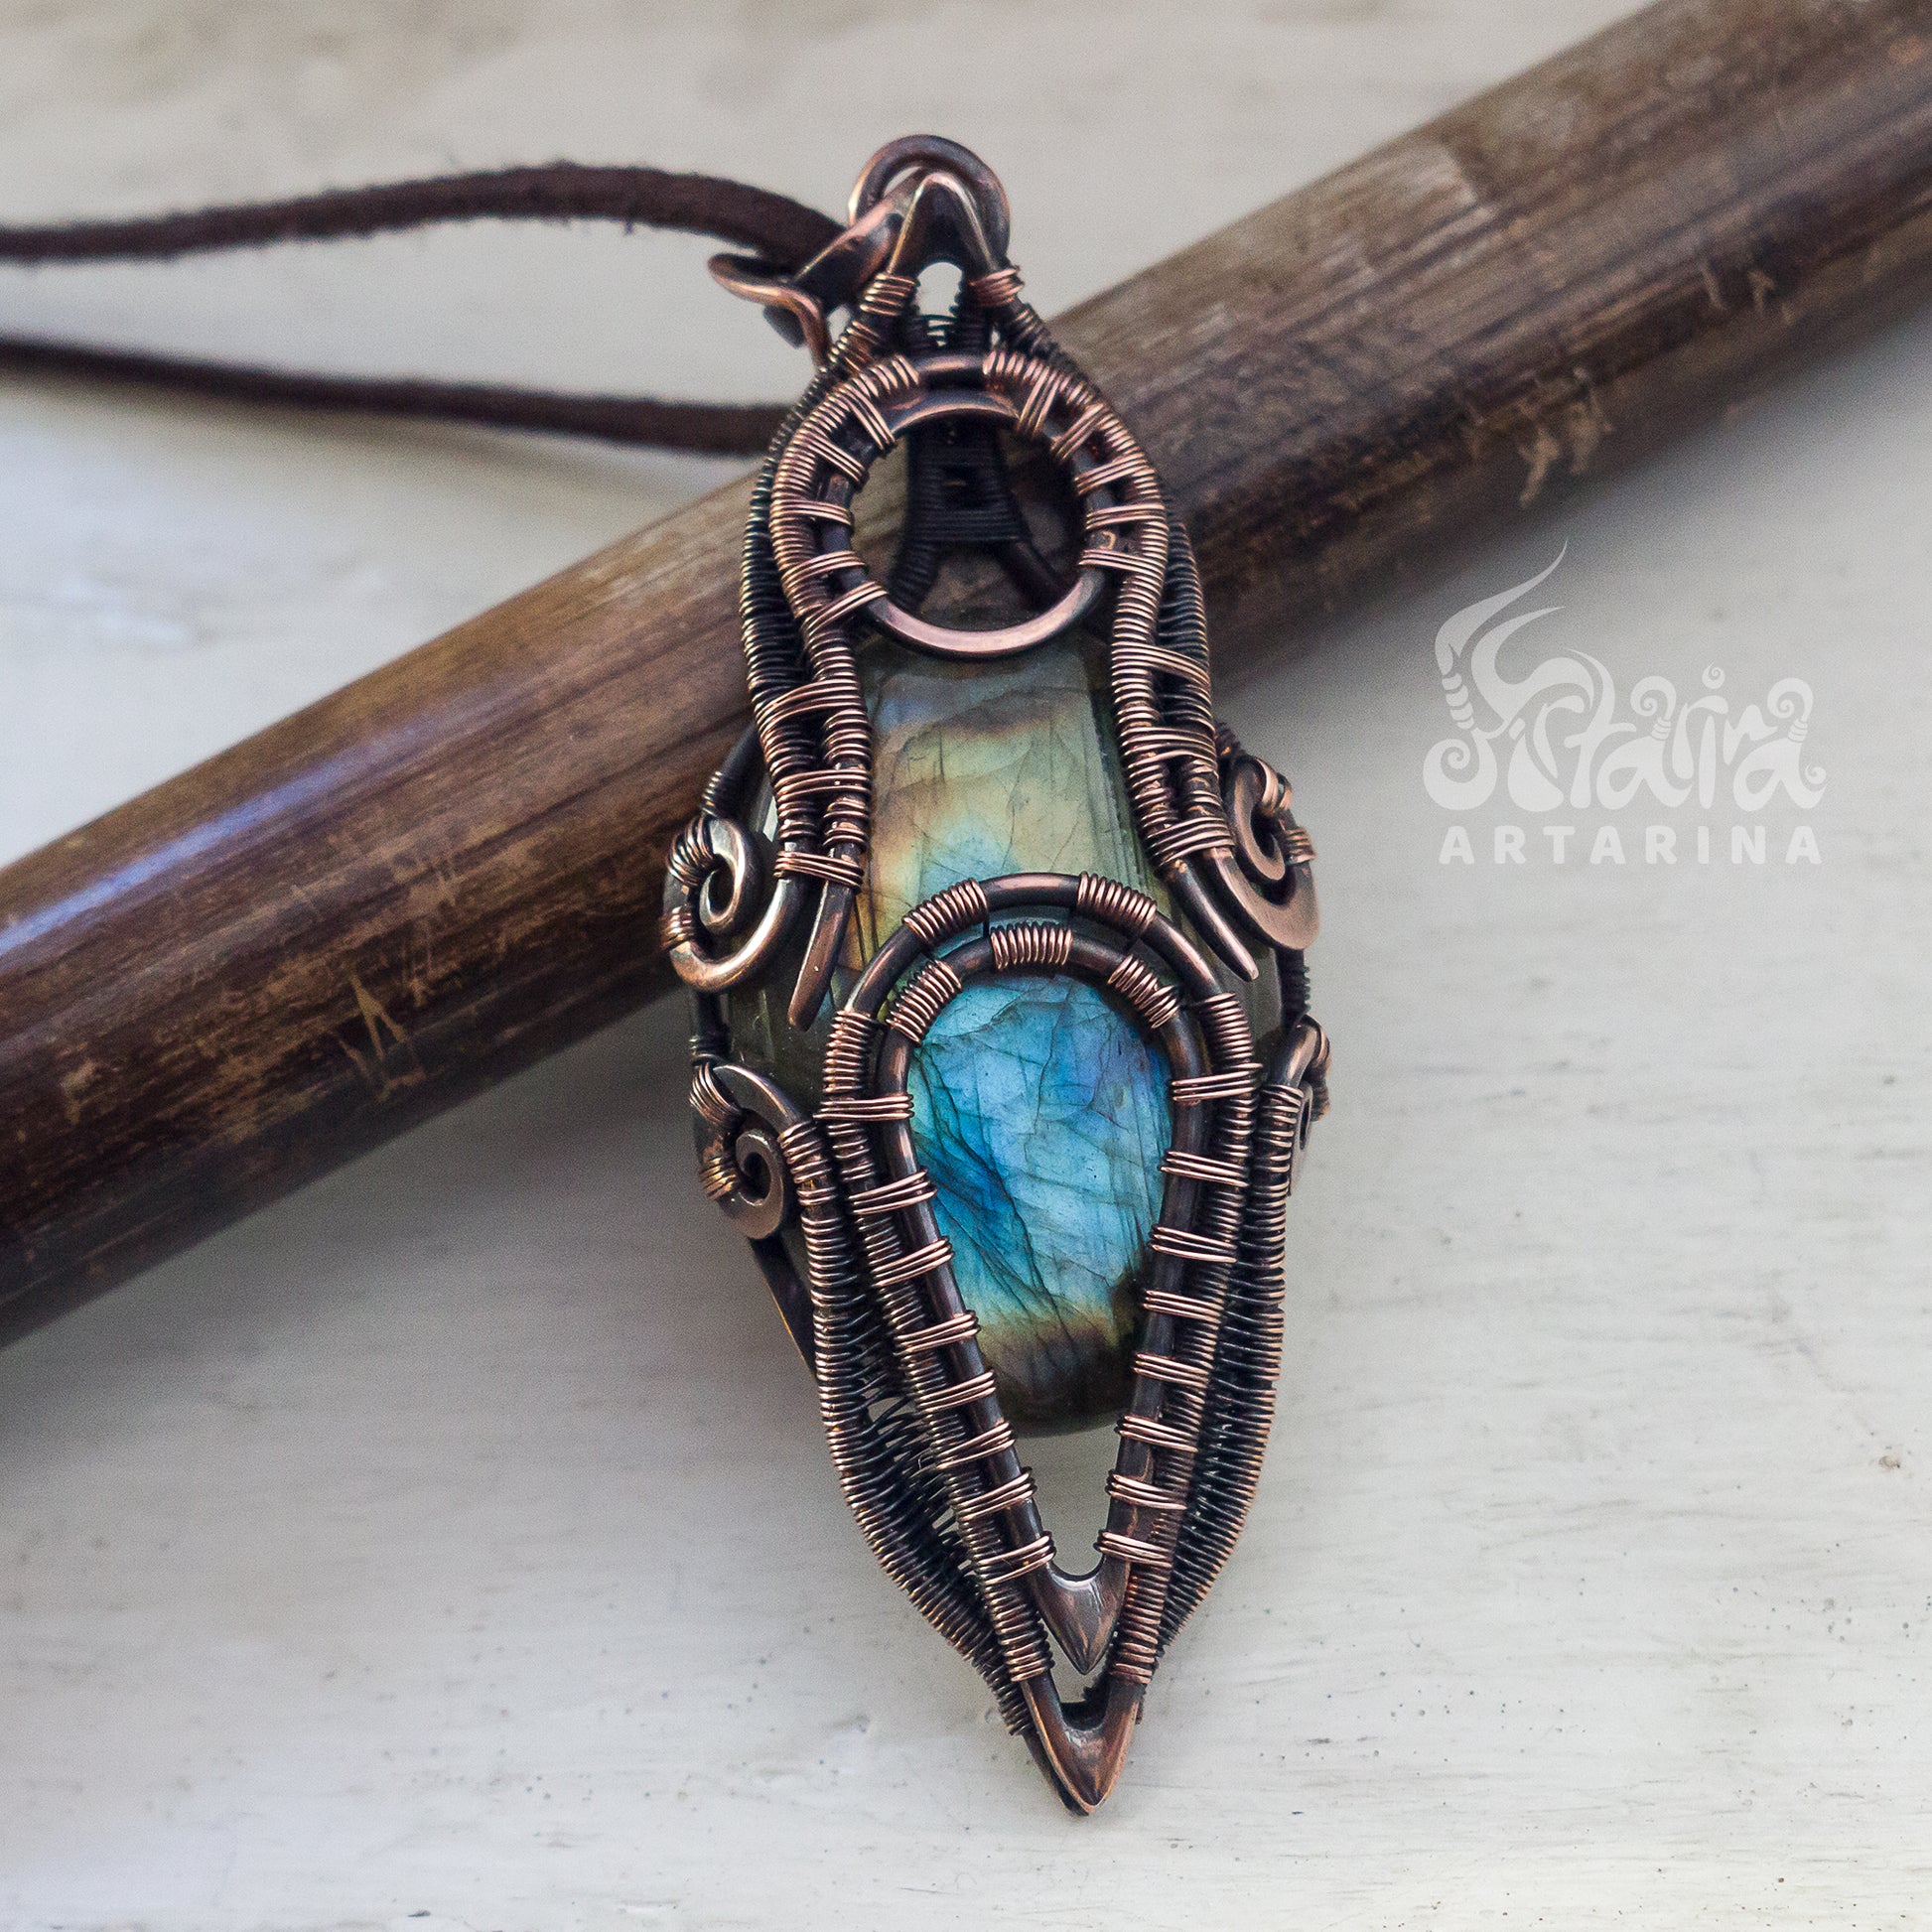 Handmade copper pendant with bright labradorite stone, showcasing full-area iridescence - a bold statement piece for the modern man's distinctive style pic 1